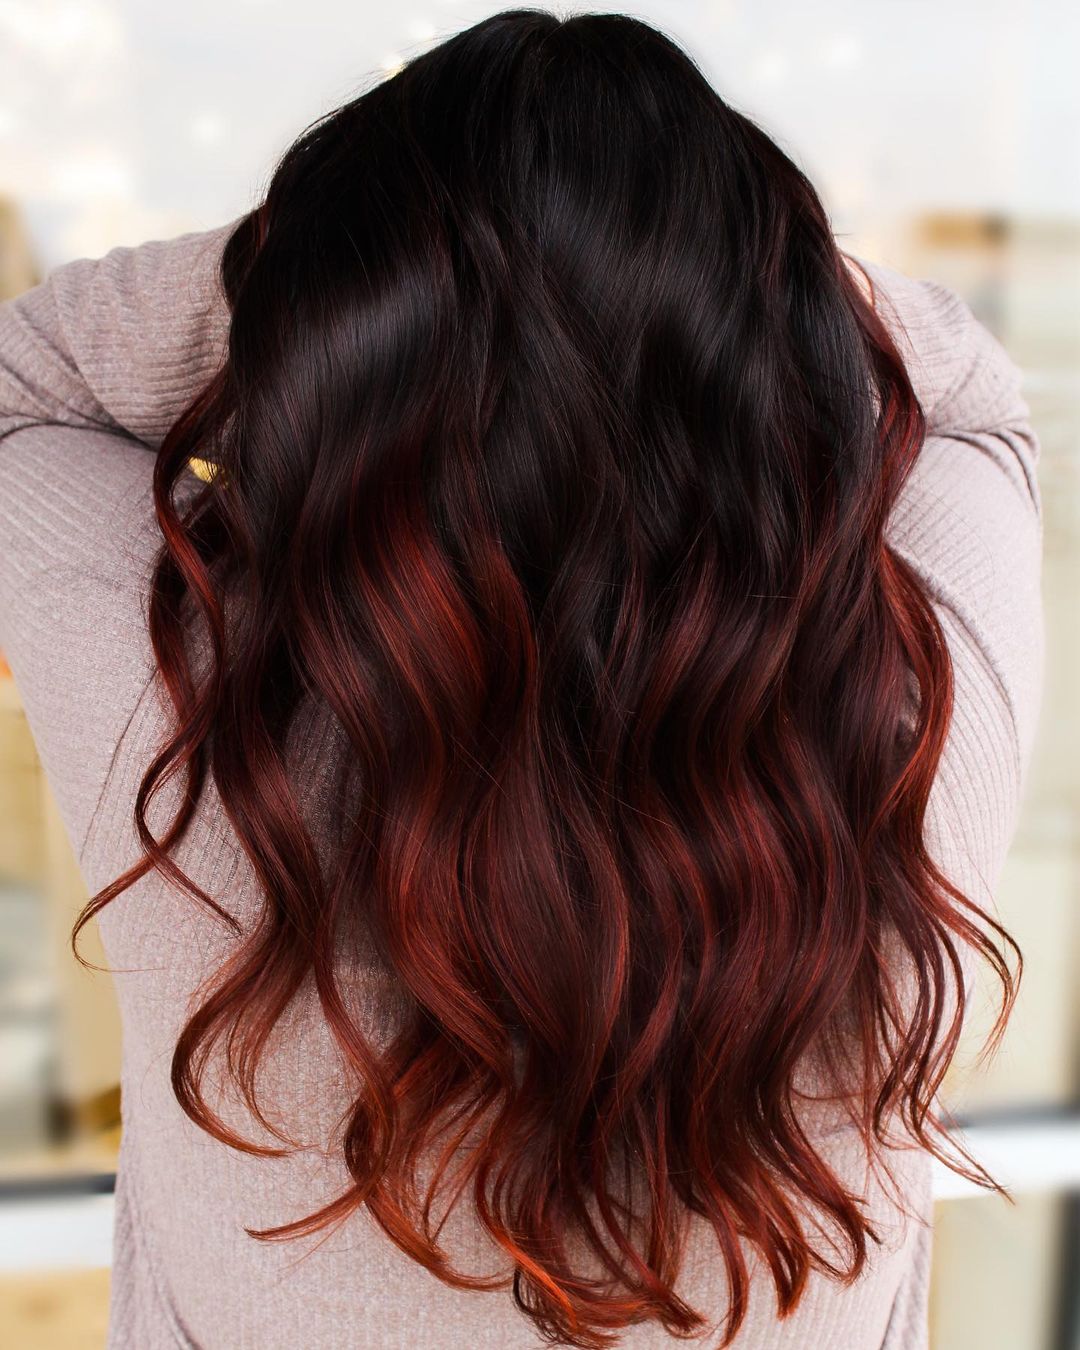 Dark Brown to Bright Red Ombre on Long Wavy Hair